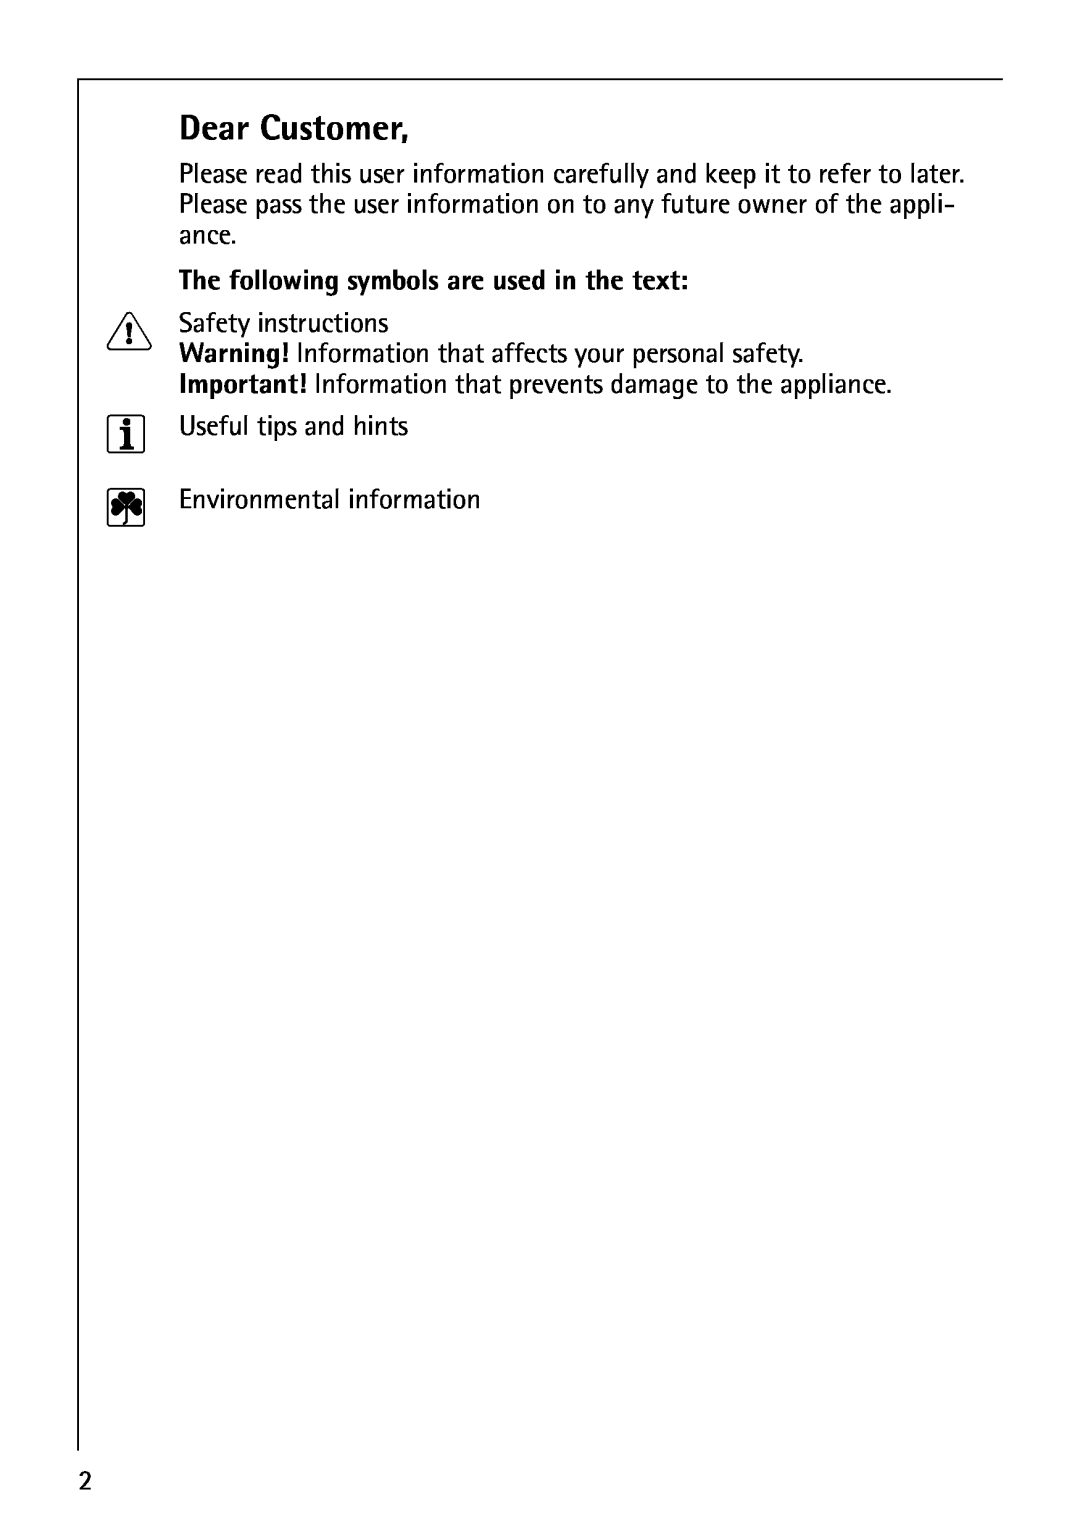 Electrolux B8871-4 manual Dear Customer, The following symbols are used in the text 